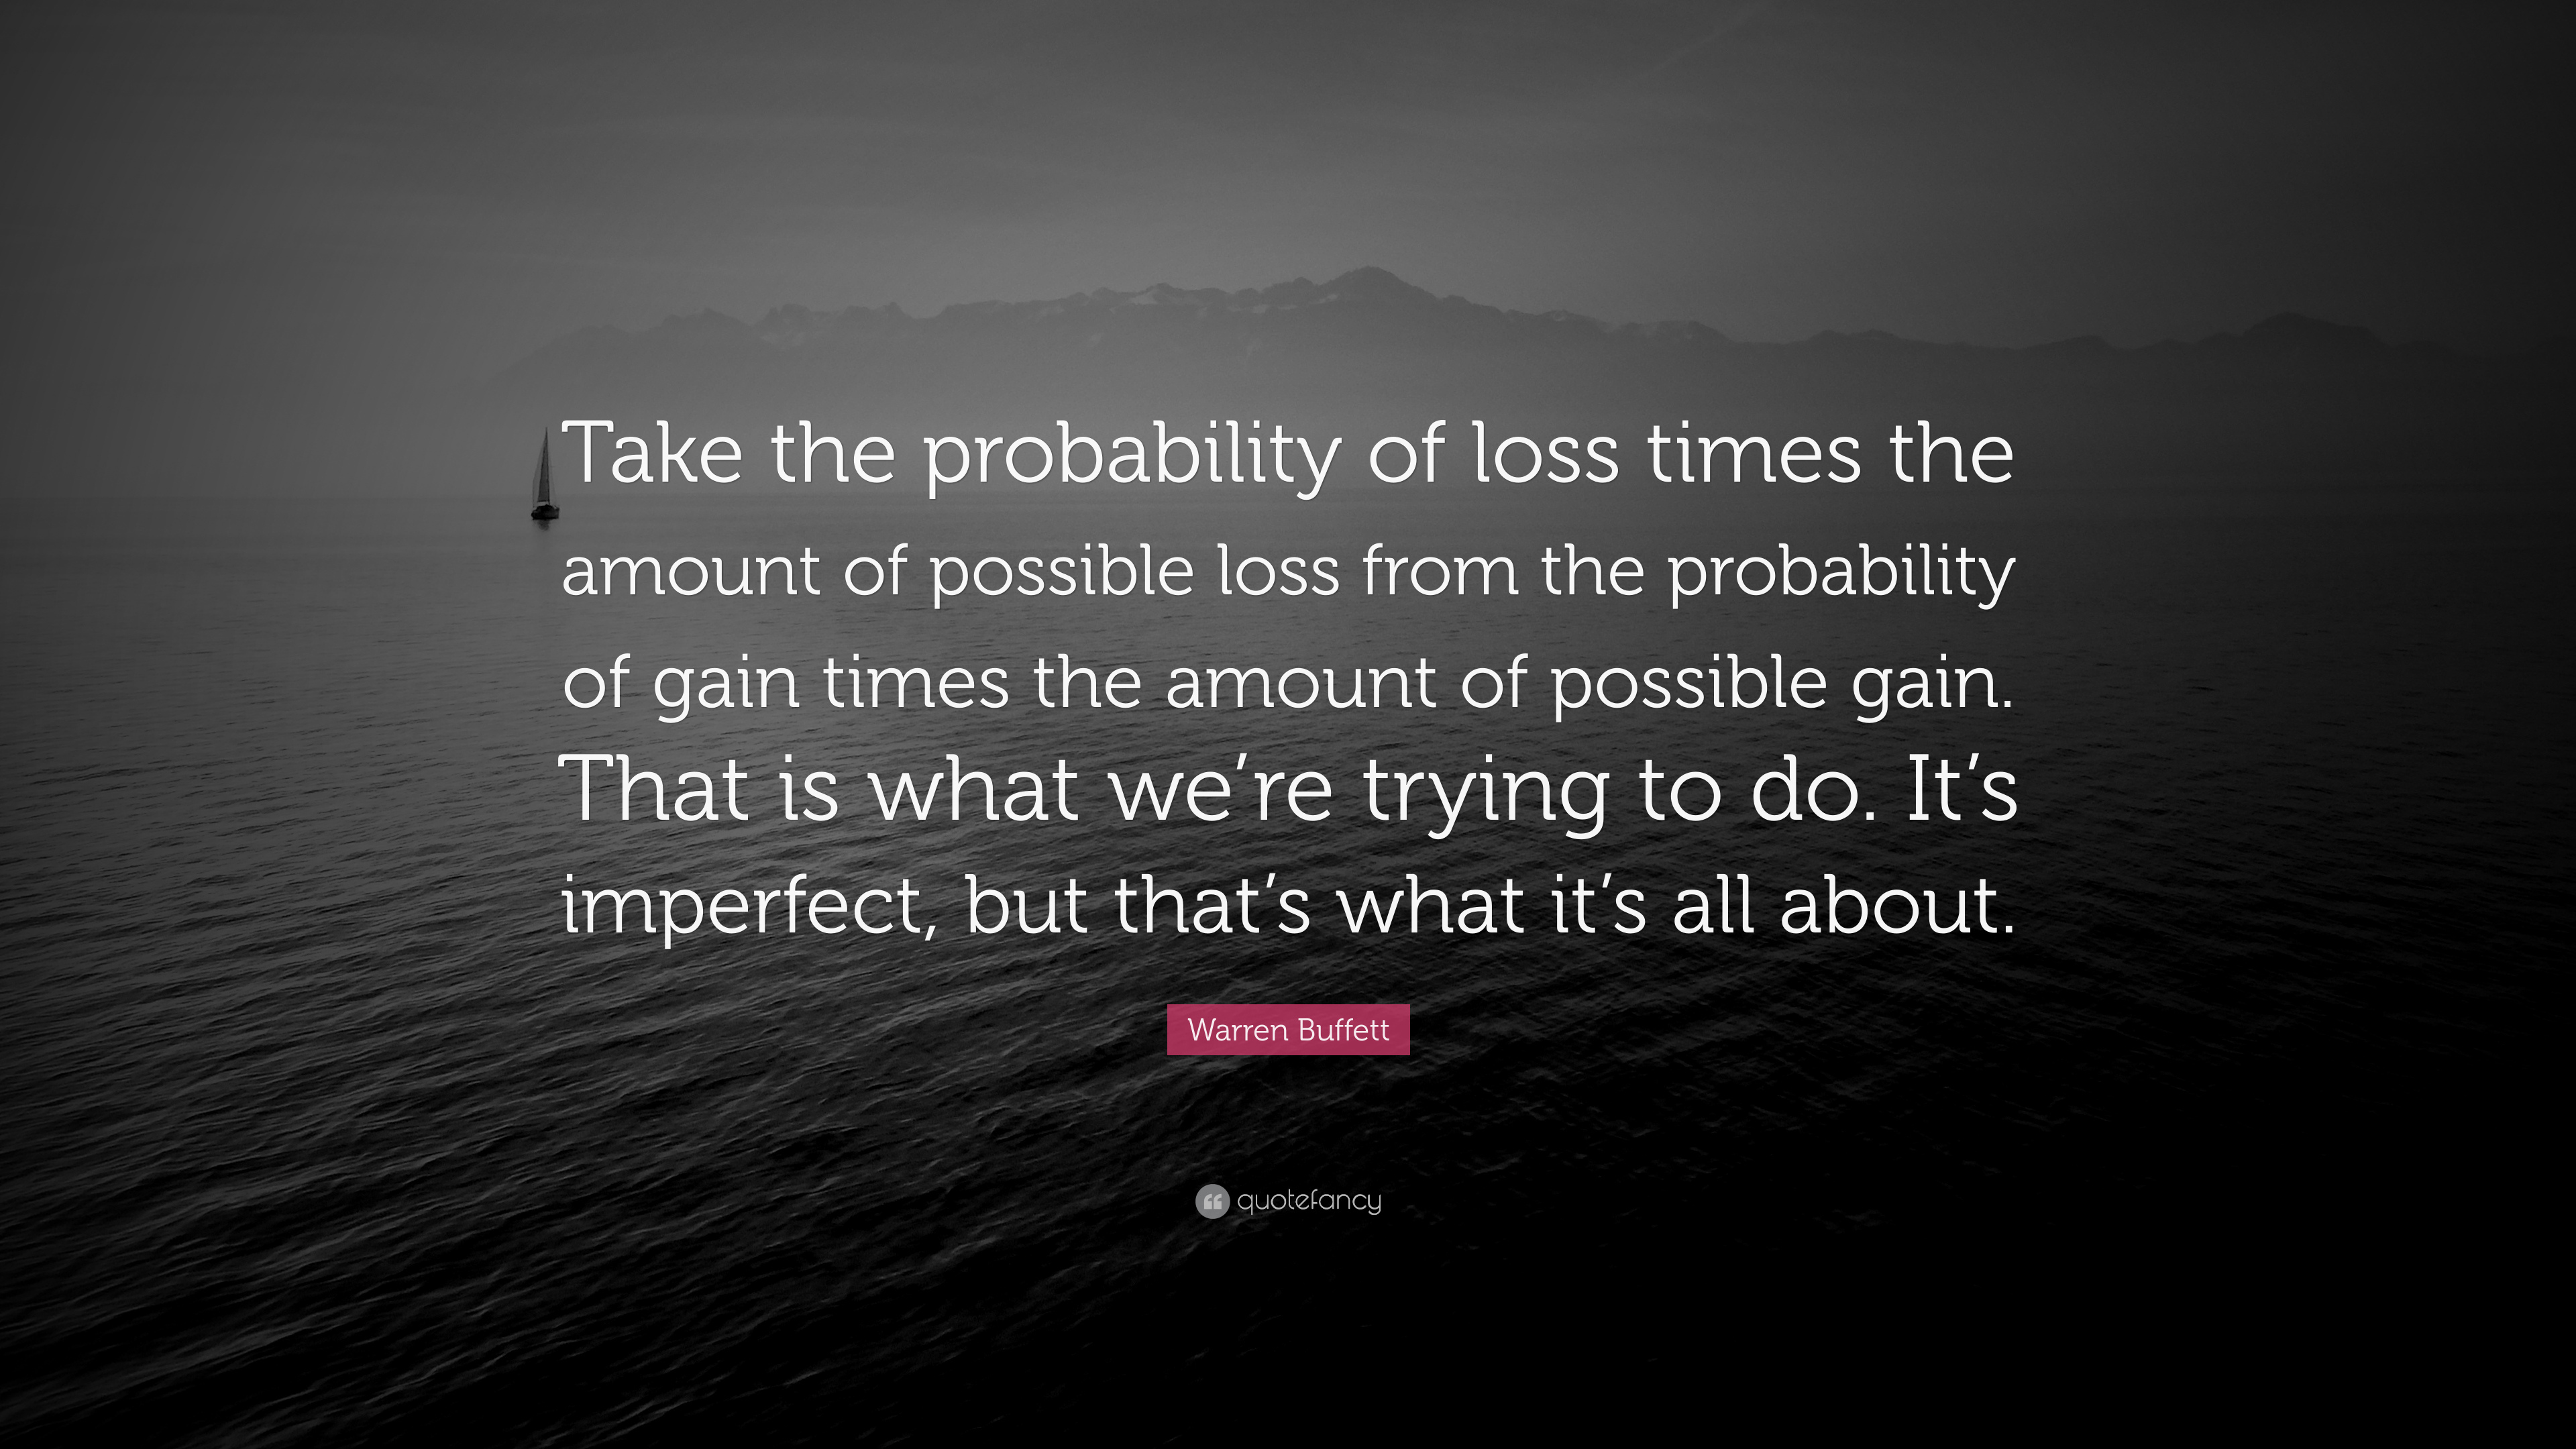 Warren Buffett Quote: “Take the probability of loss times the amount